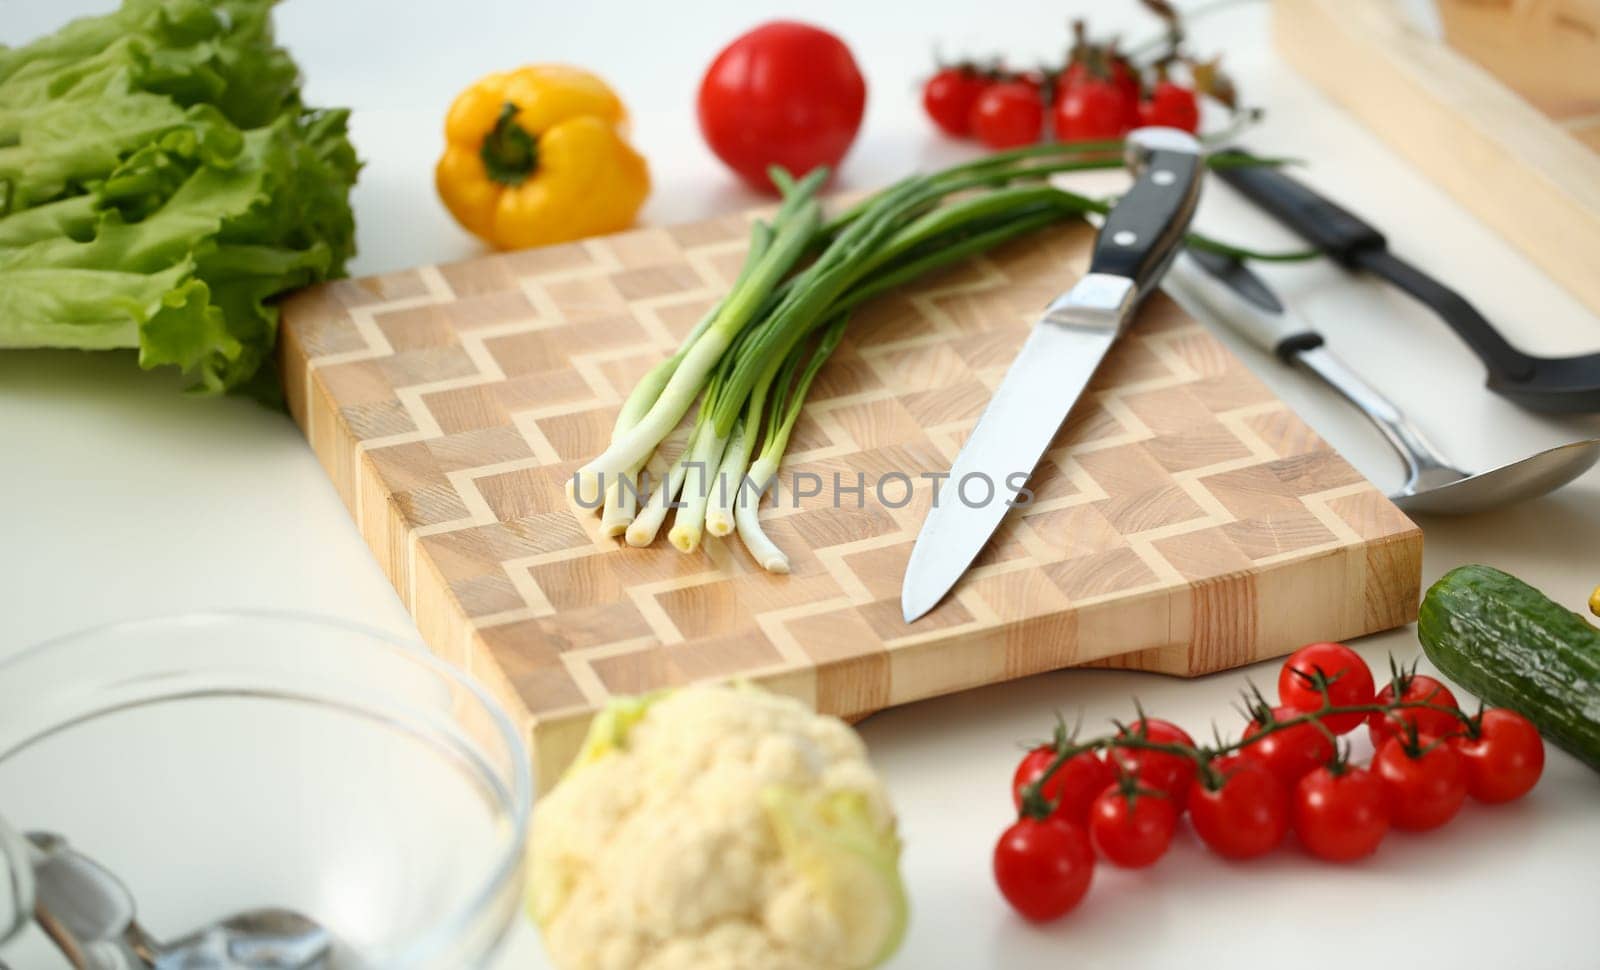 Knife and green onions for salad or fresh vegetable soup with vitamins are on wooden cutting board. Raw food and vegetarian food recipe book in modern society is a popular concept.